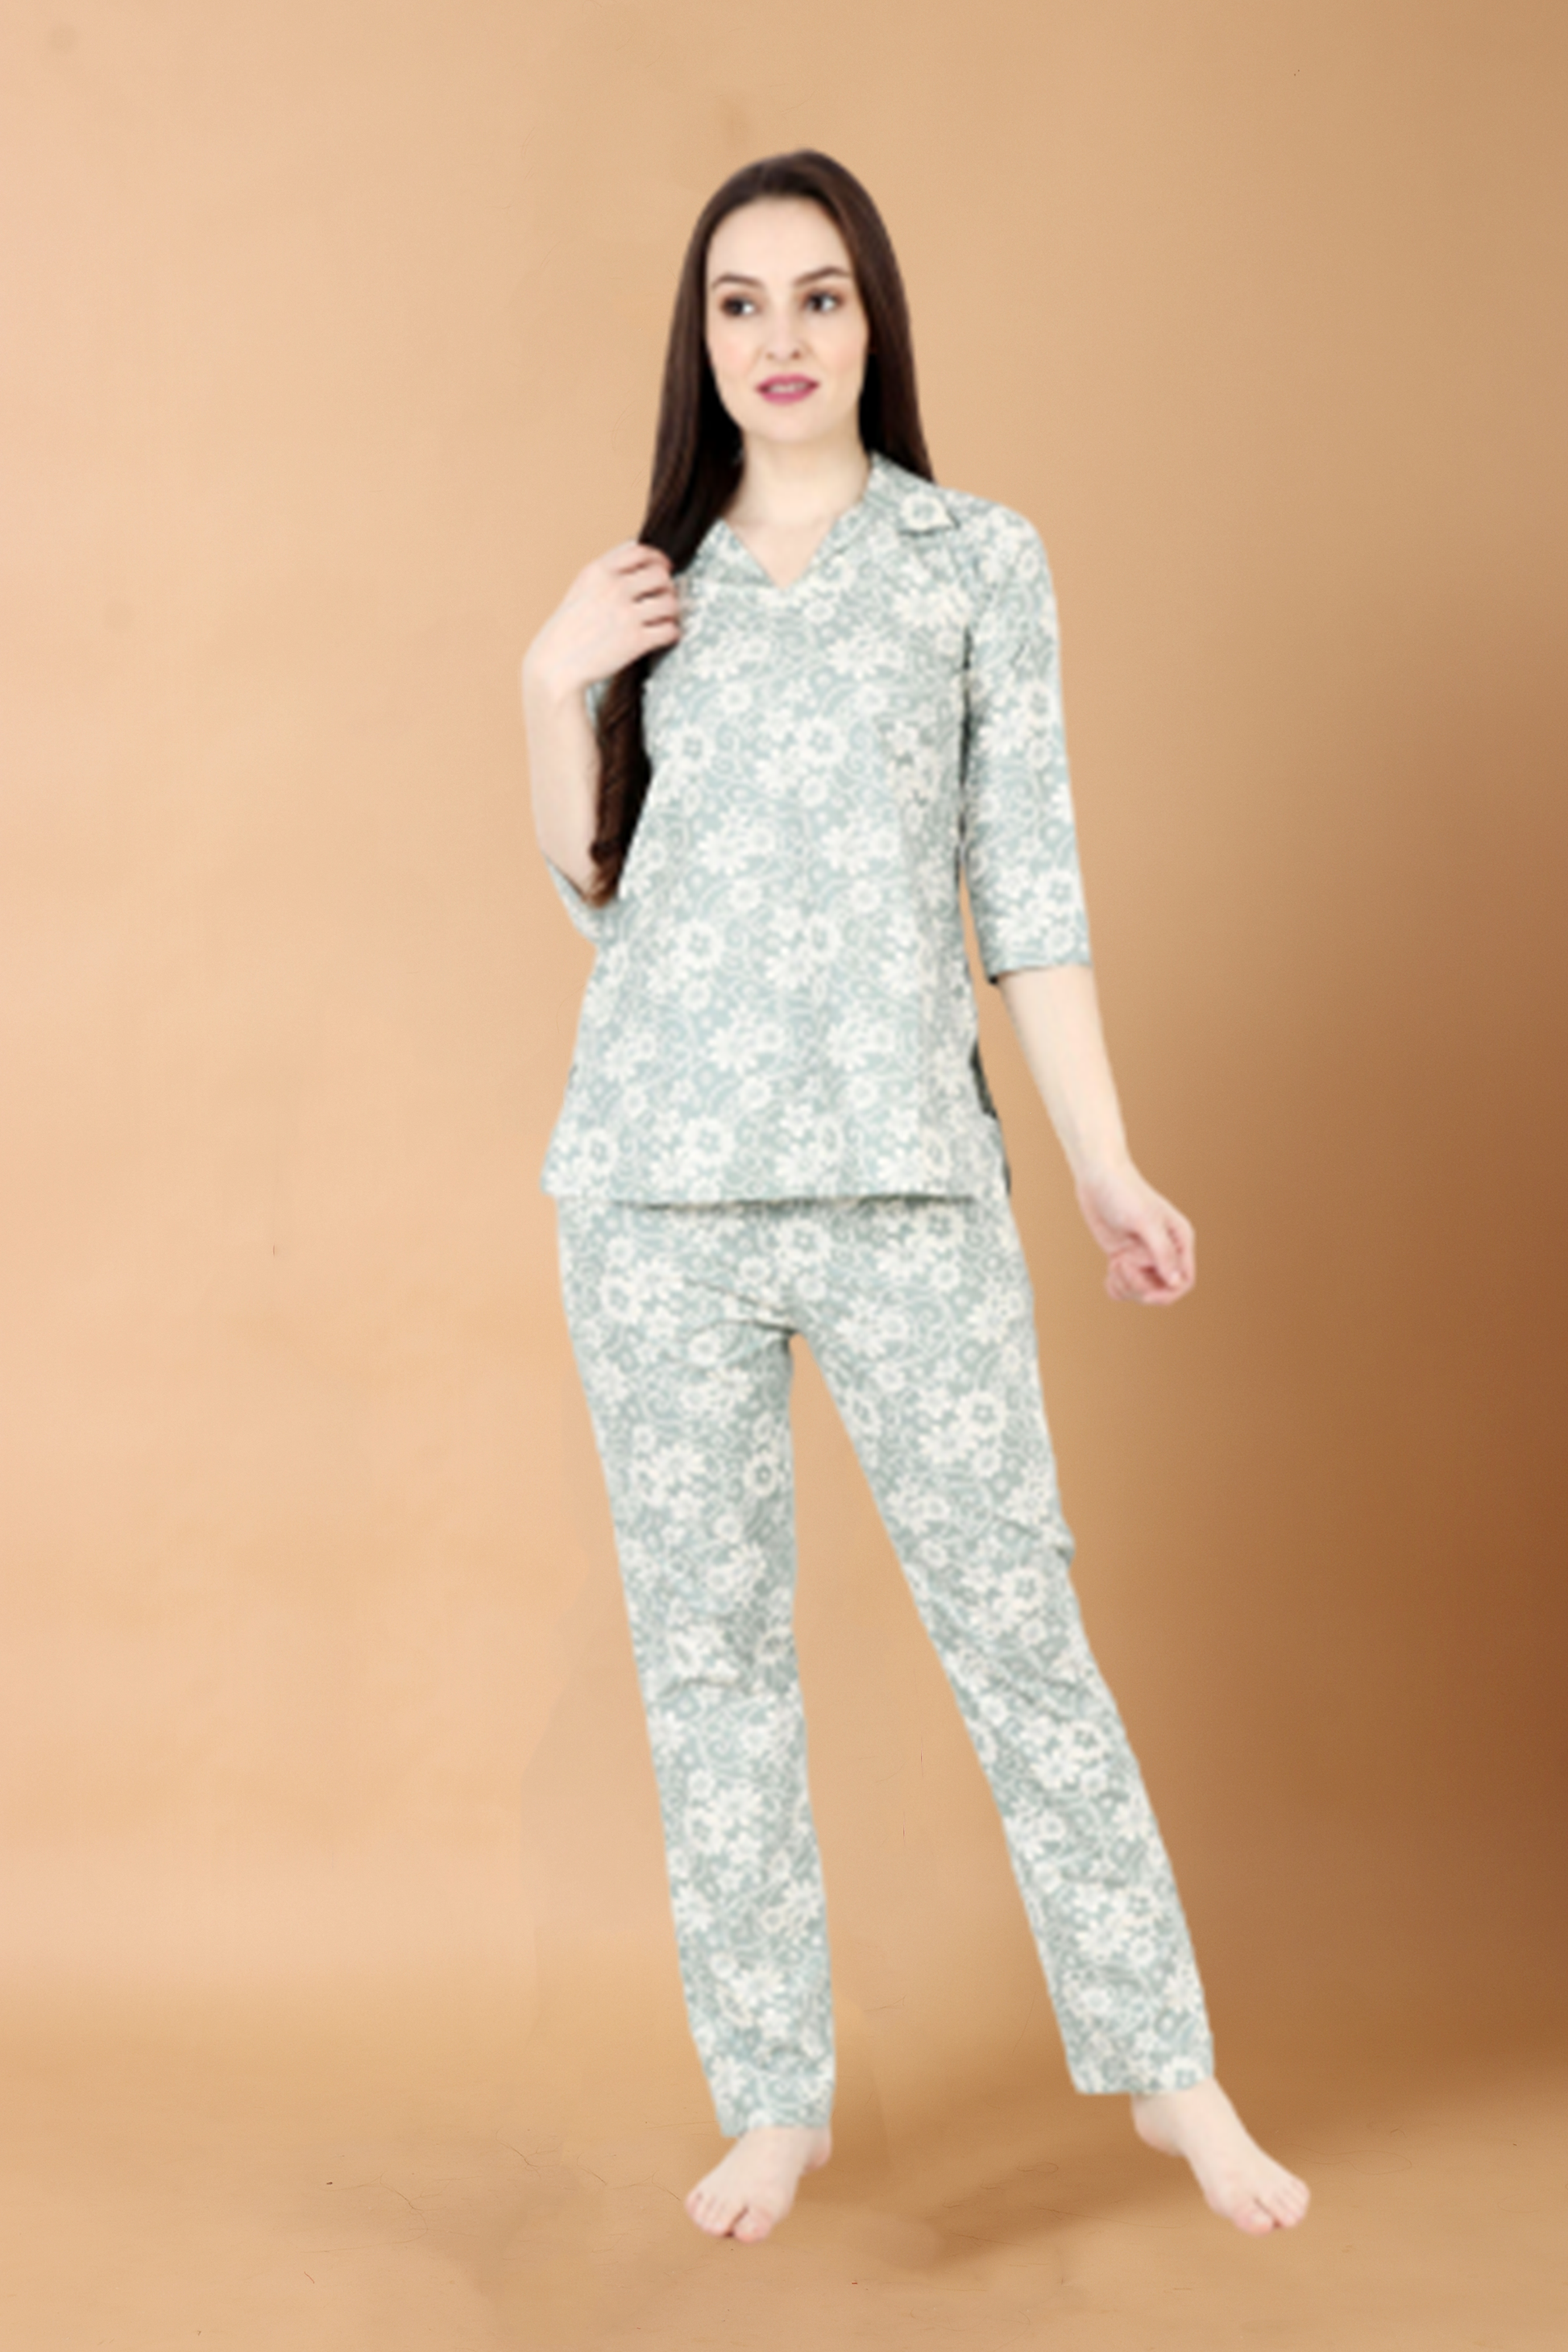 All Size, Buttery Peach Night Suit, Detailed with Contrast, Double Pockets, Dual Pockets, Floral Print, Fully Elasticized Pajama, Half Sleeves, Night Suit, Peach, Peach Night Suit, Plus Size,